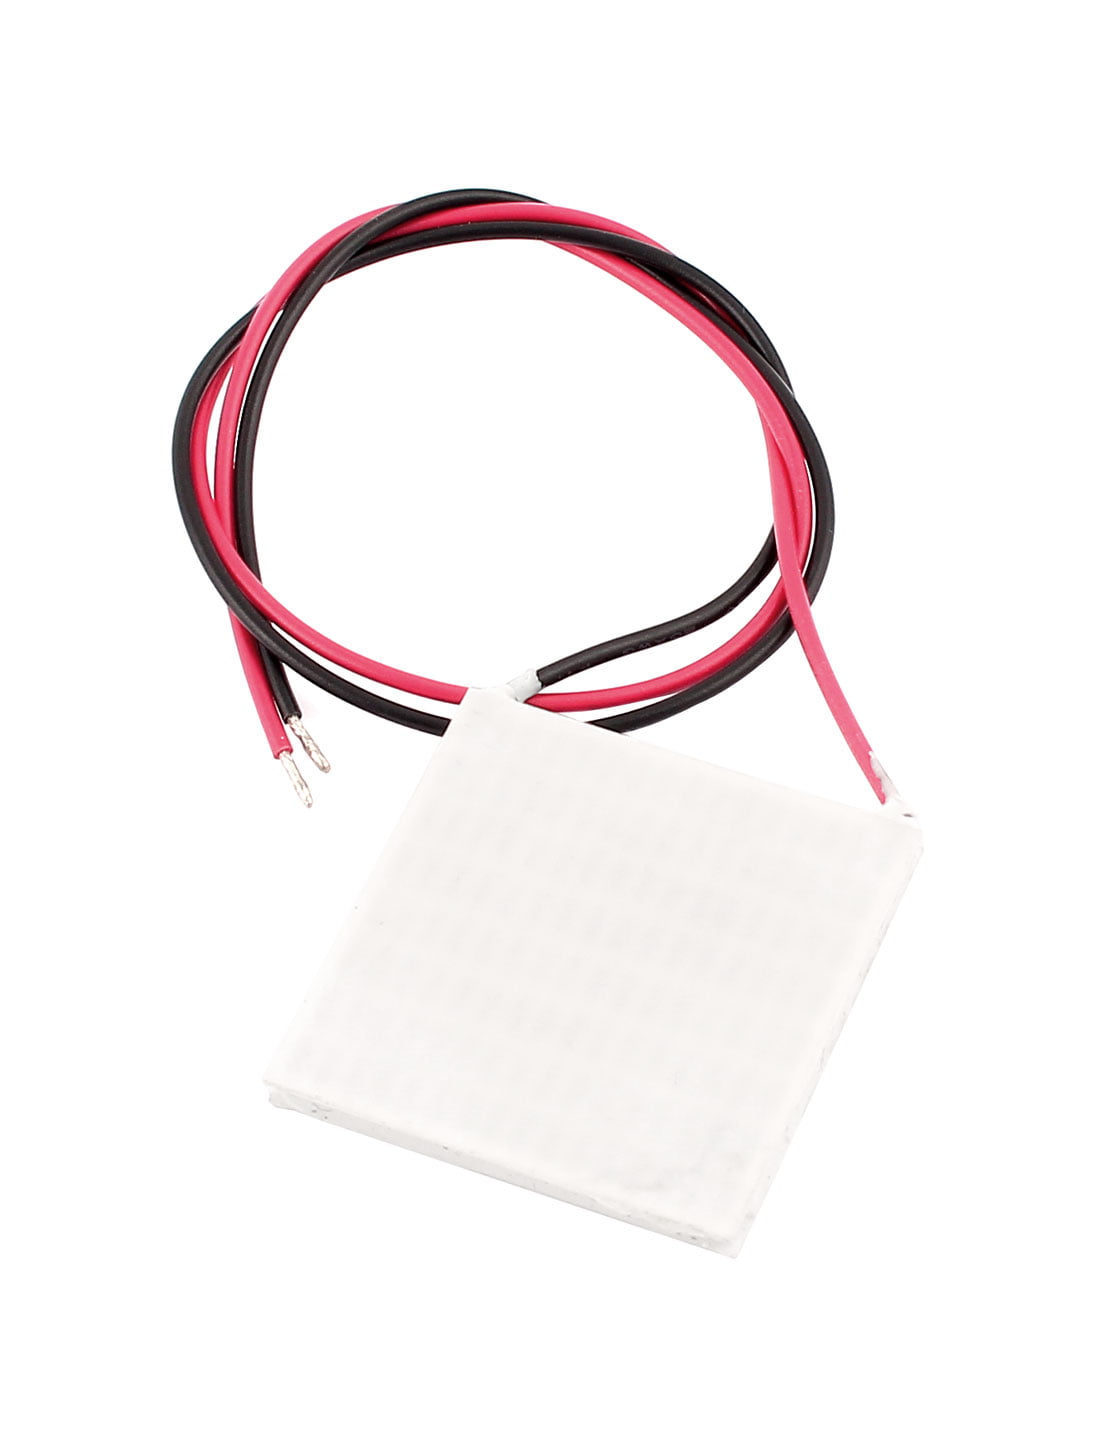 Karcy Thermoelectric Cooler Panel TEC1-12704 12V 37W Heatsink Thermoelectric Cooling Plate Module 40x40mm 